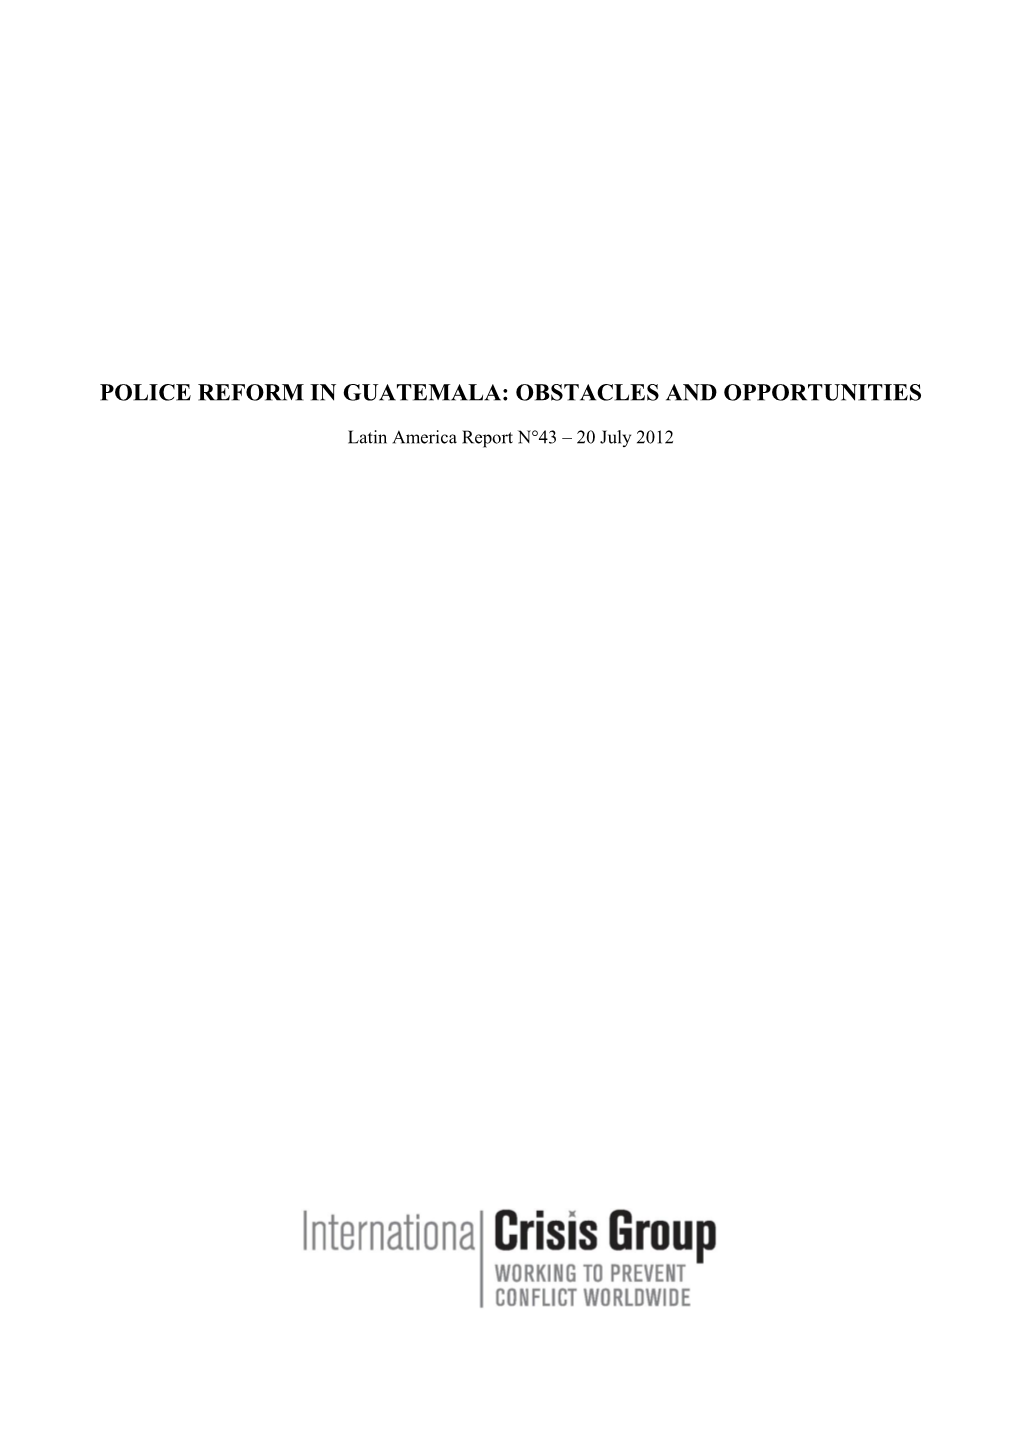 Police Reform in Guatemala: Obstacles and Opportunities